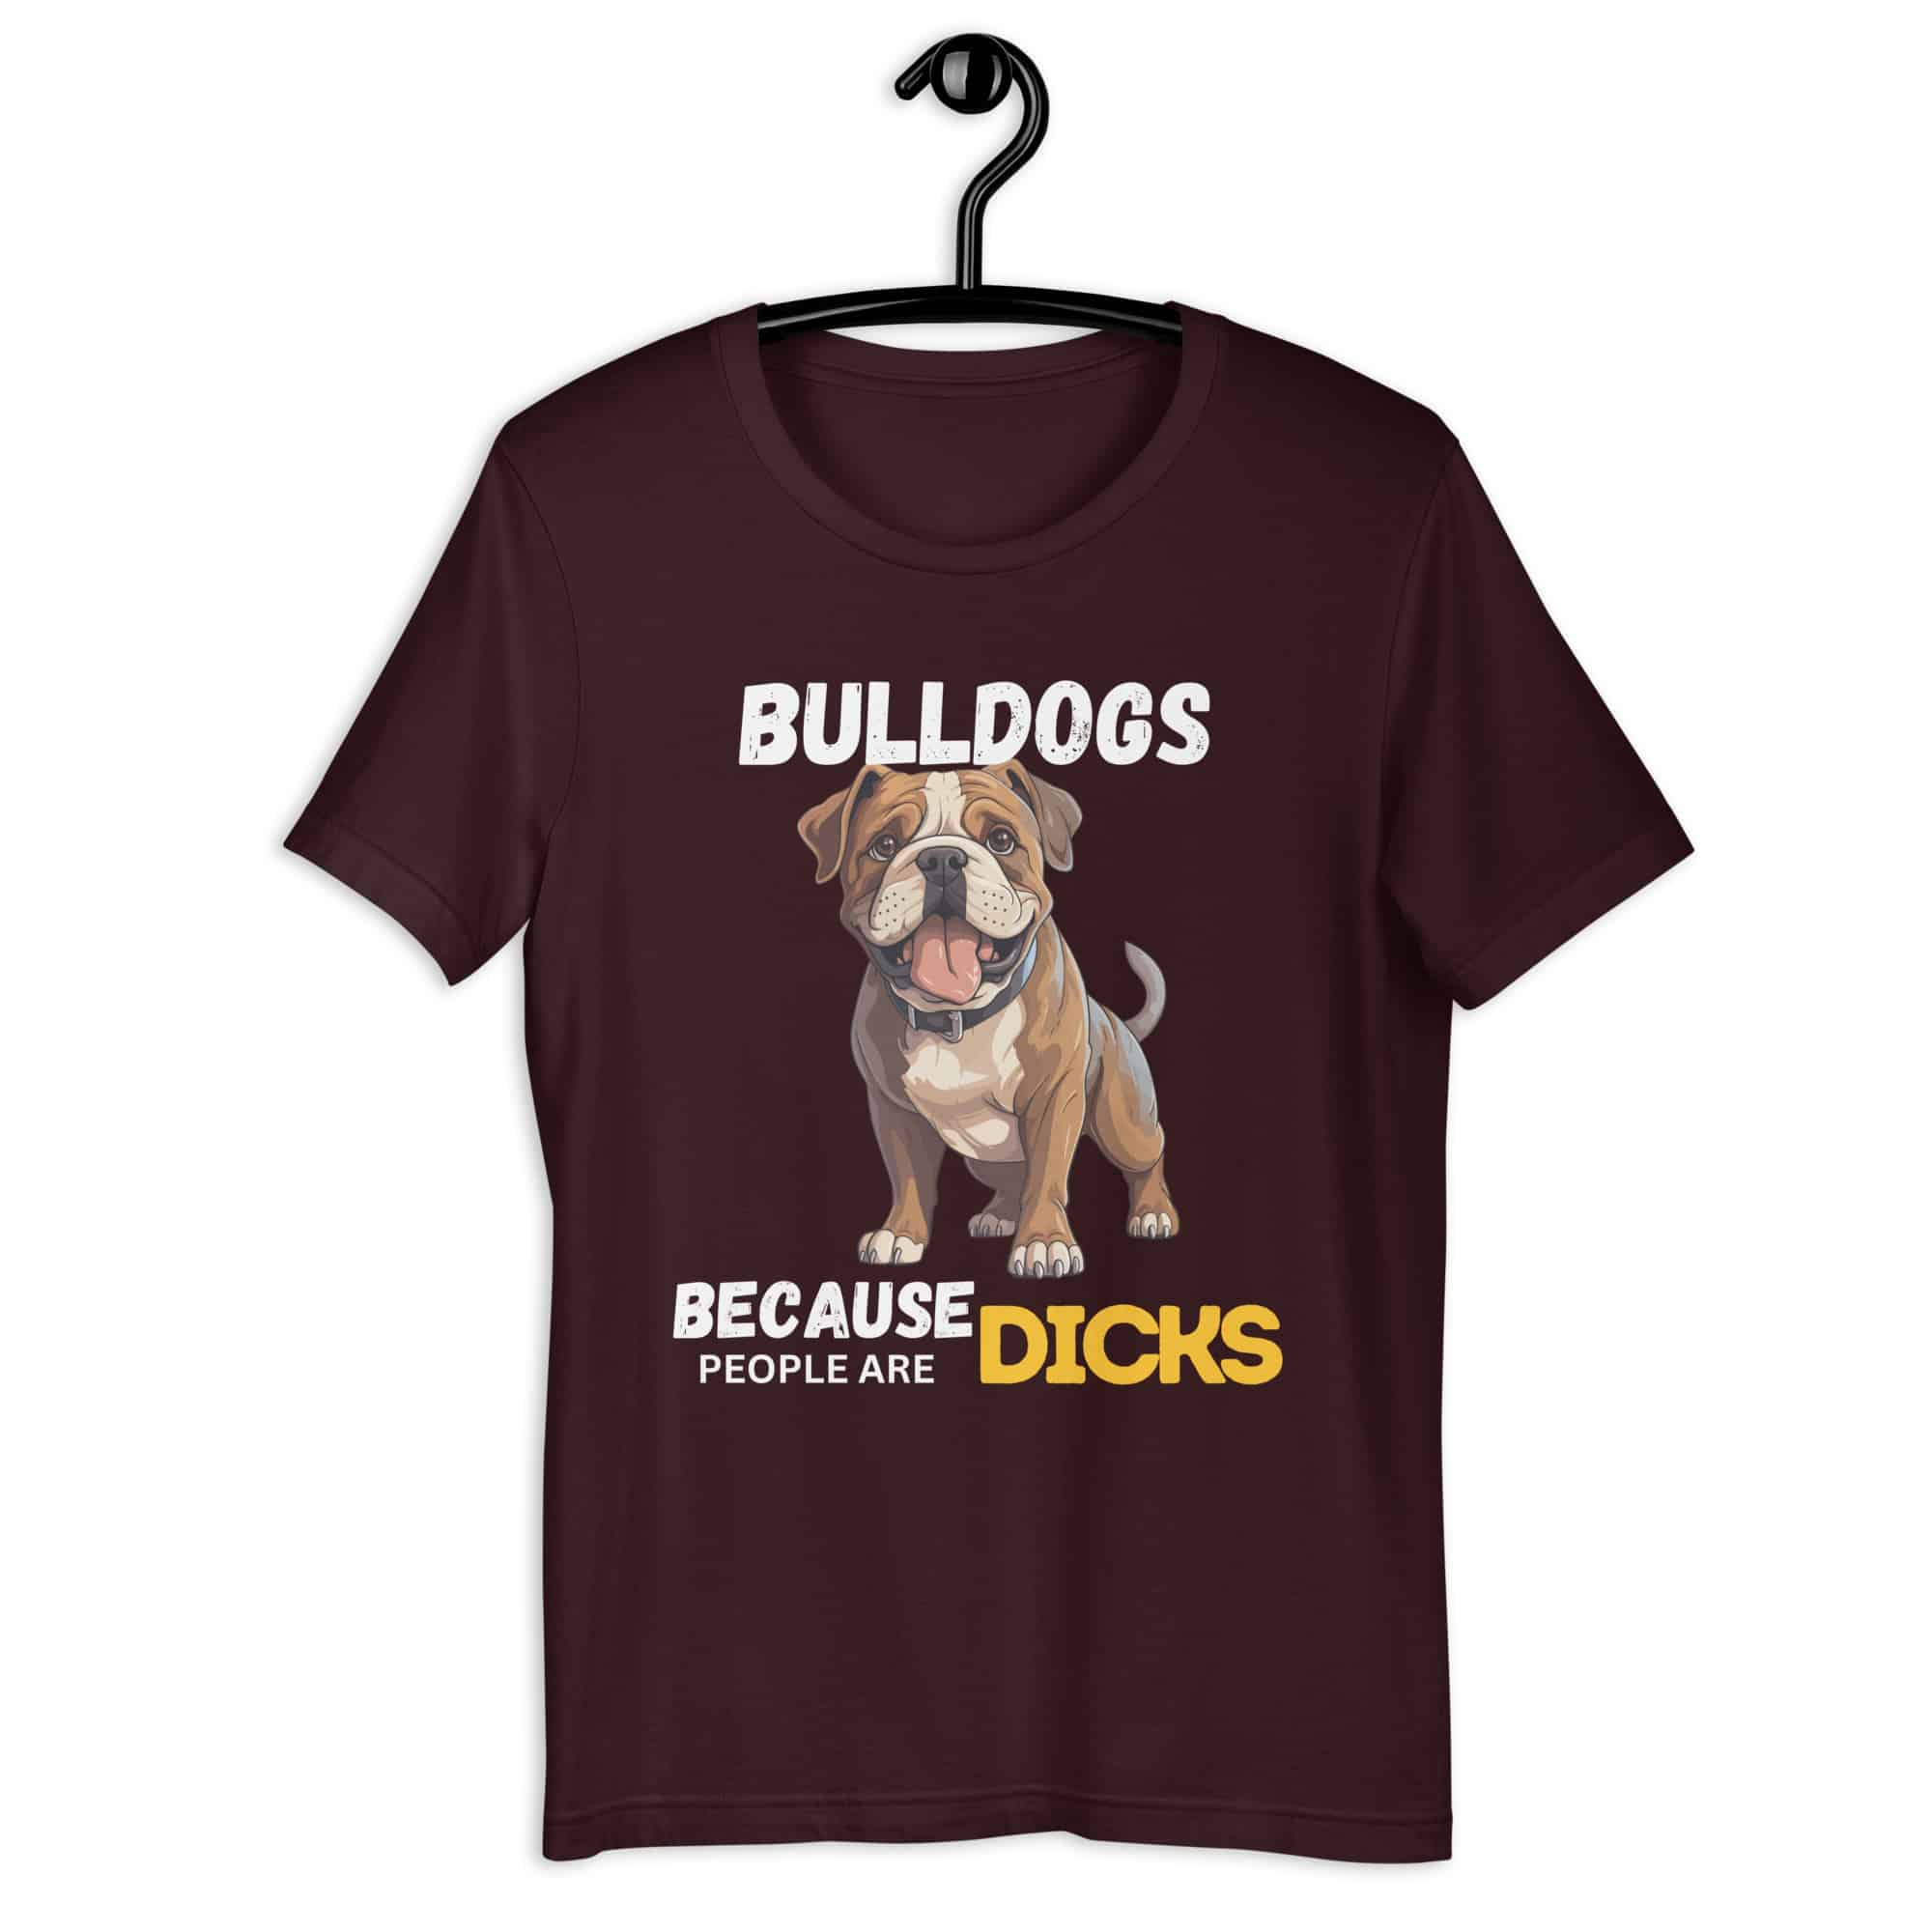 Bulldogs Because People Are Dicks Unisex T-Shirt brown